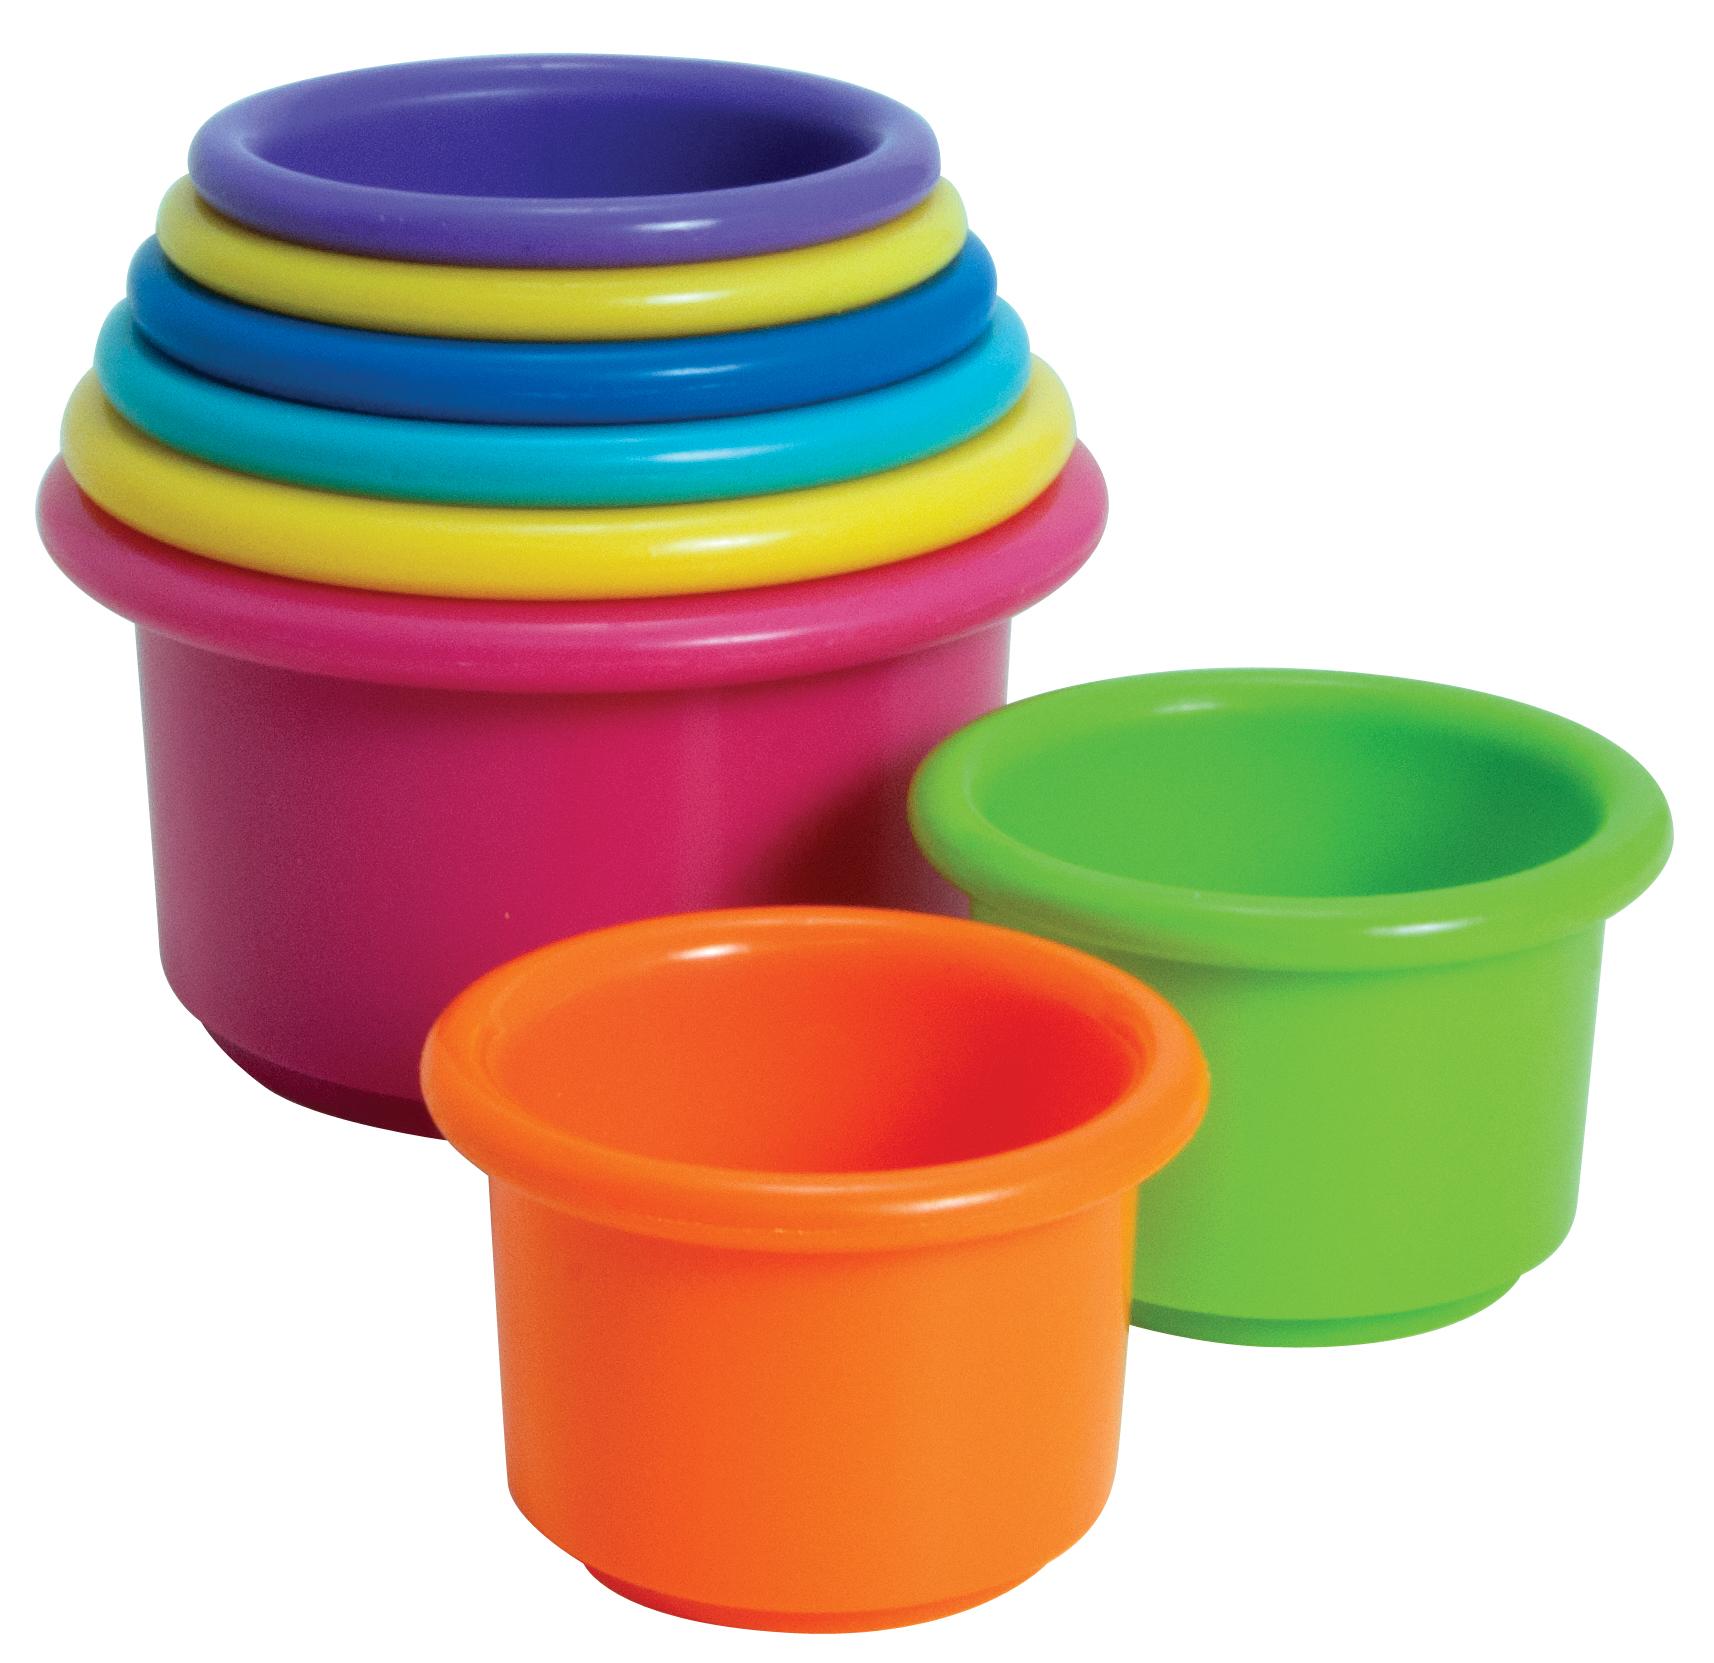 Amazon.com : The First Years Stack Up Cups : Baby Drinkware : Baby